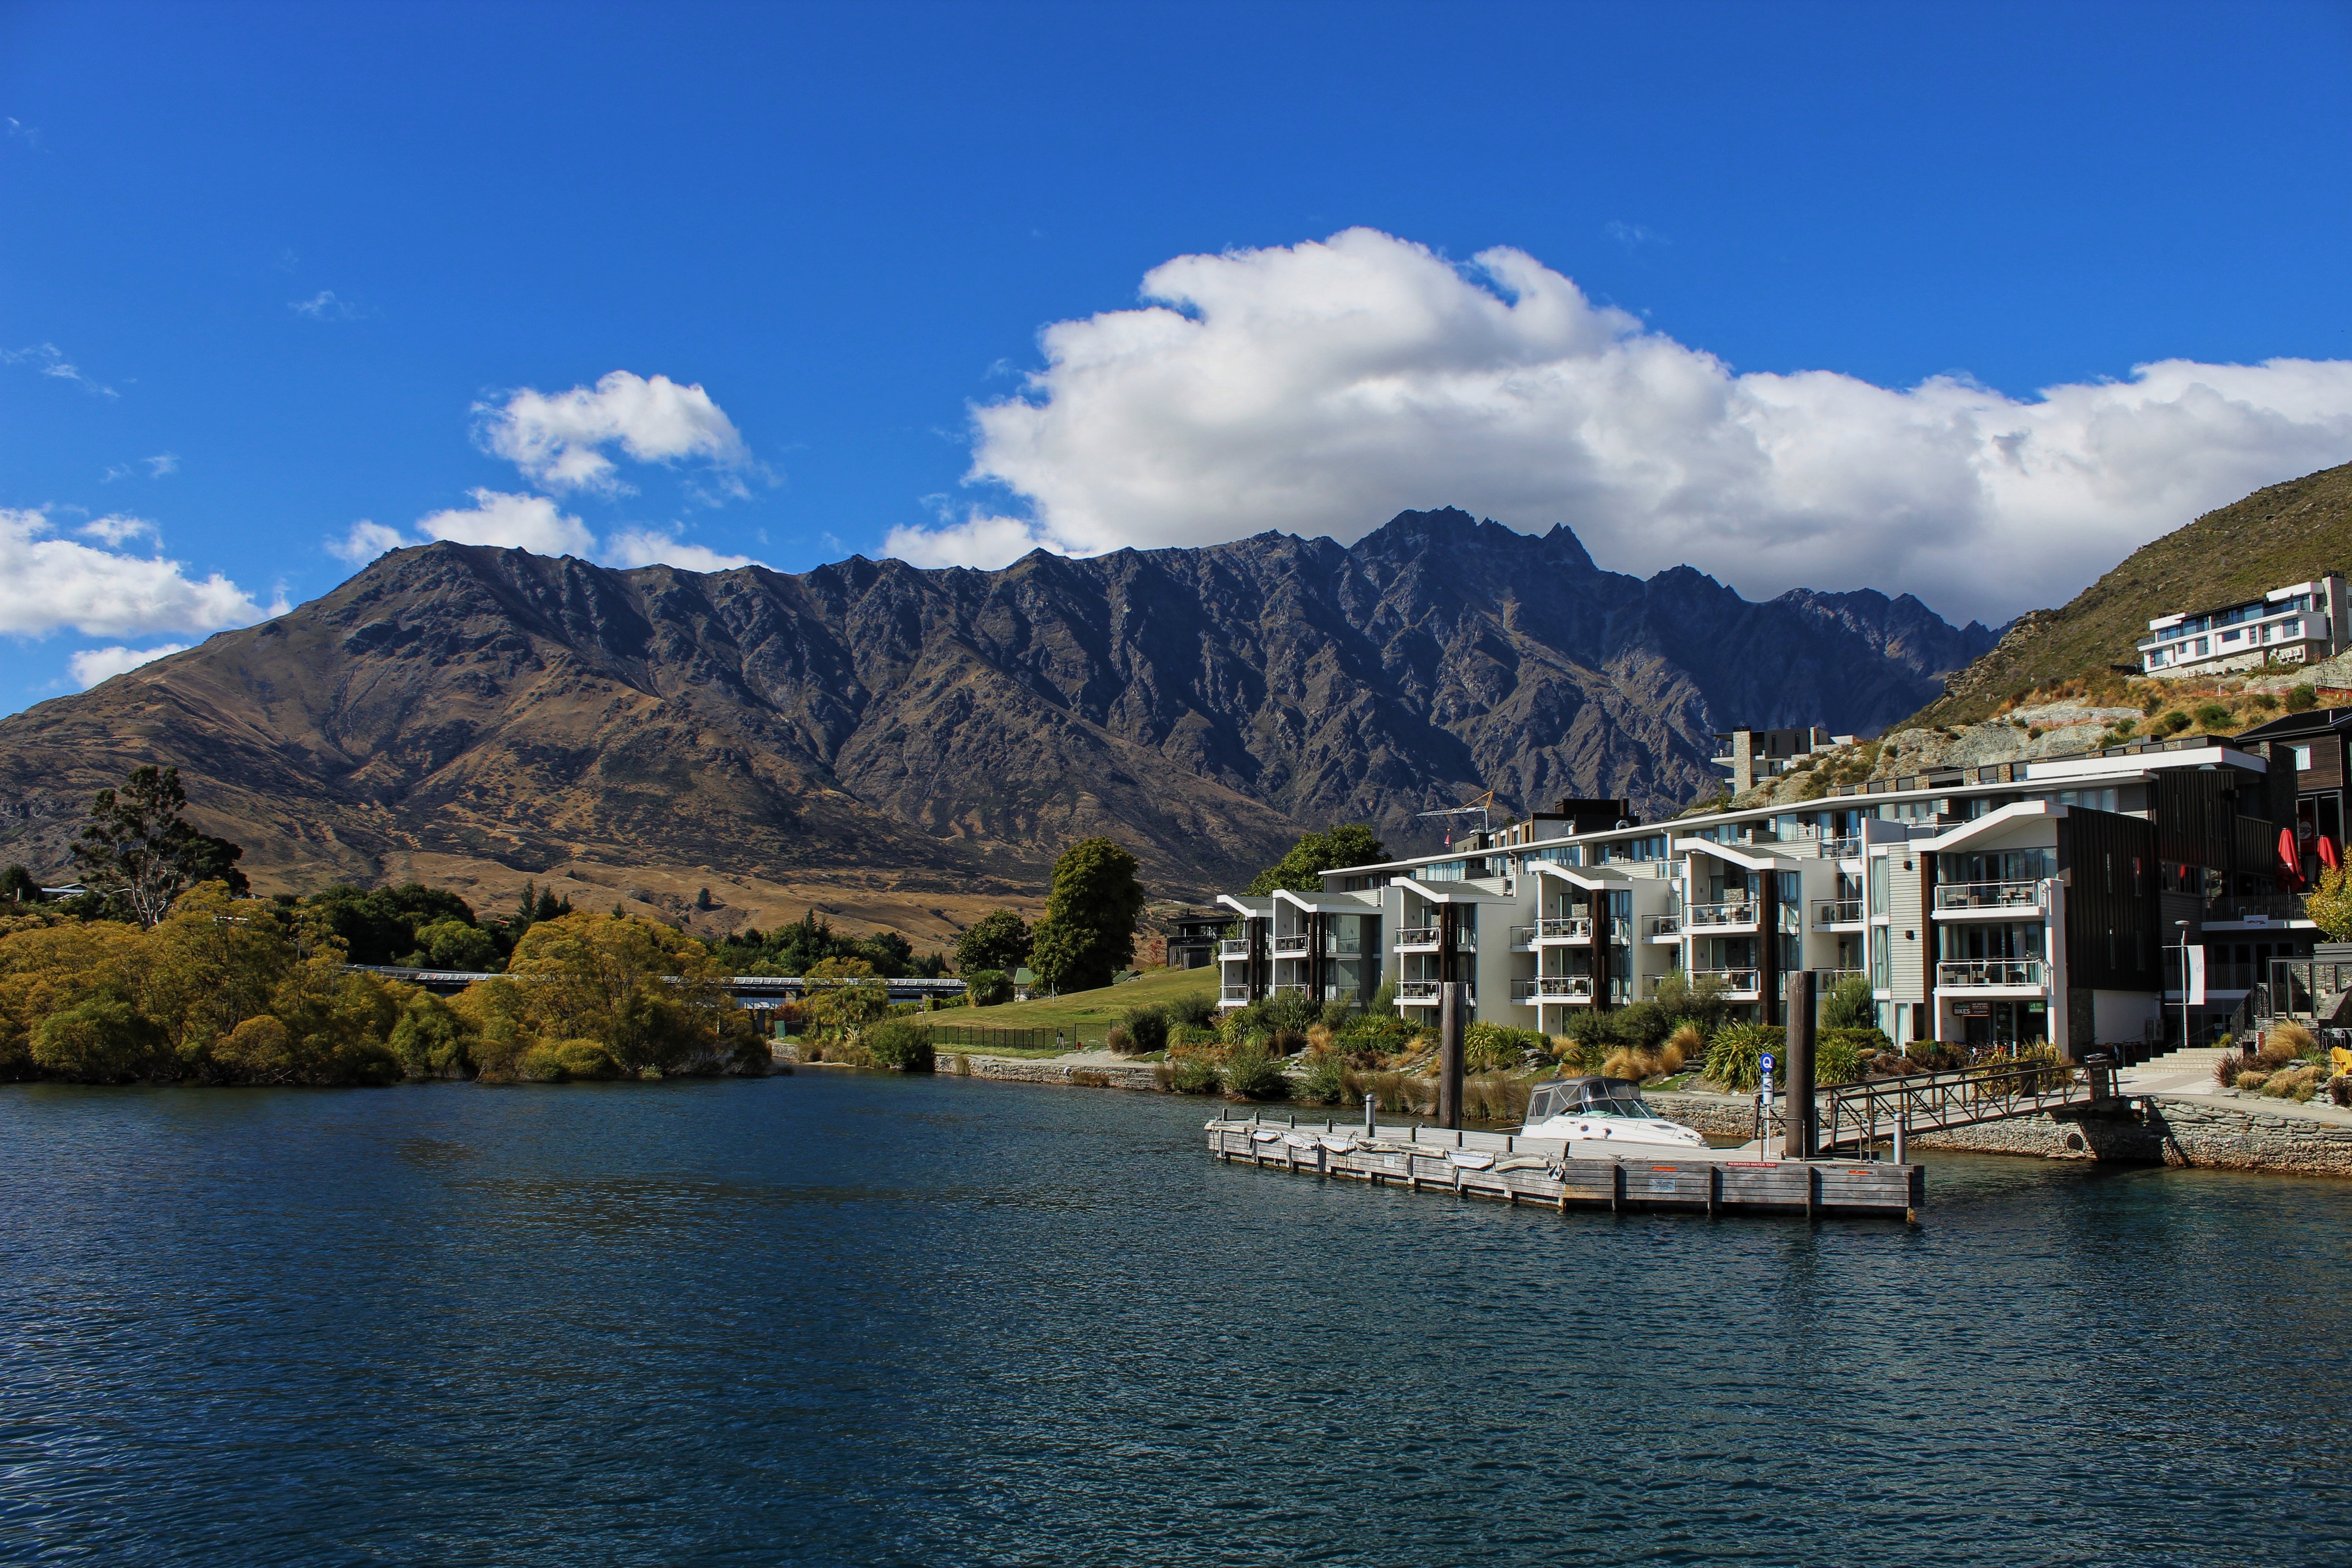 Photo of a hotel on the shore of Lake Wakatipu, Queenstown